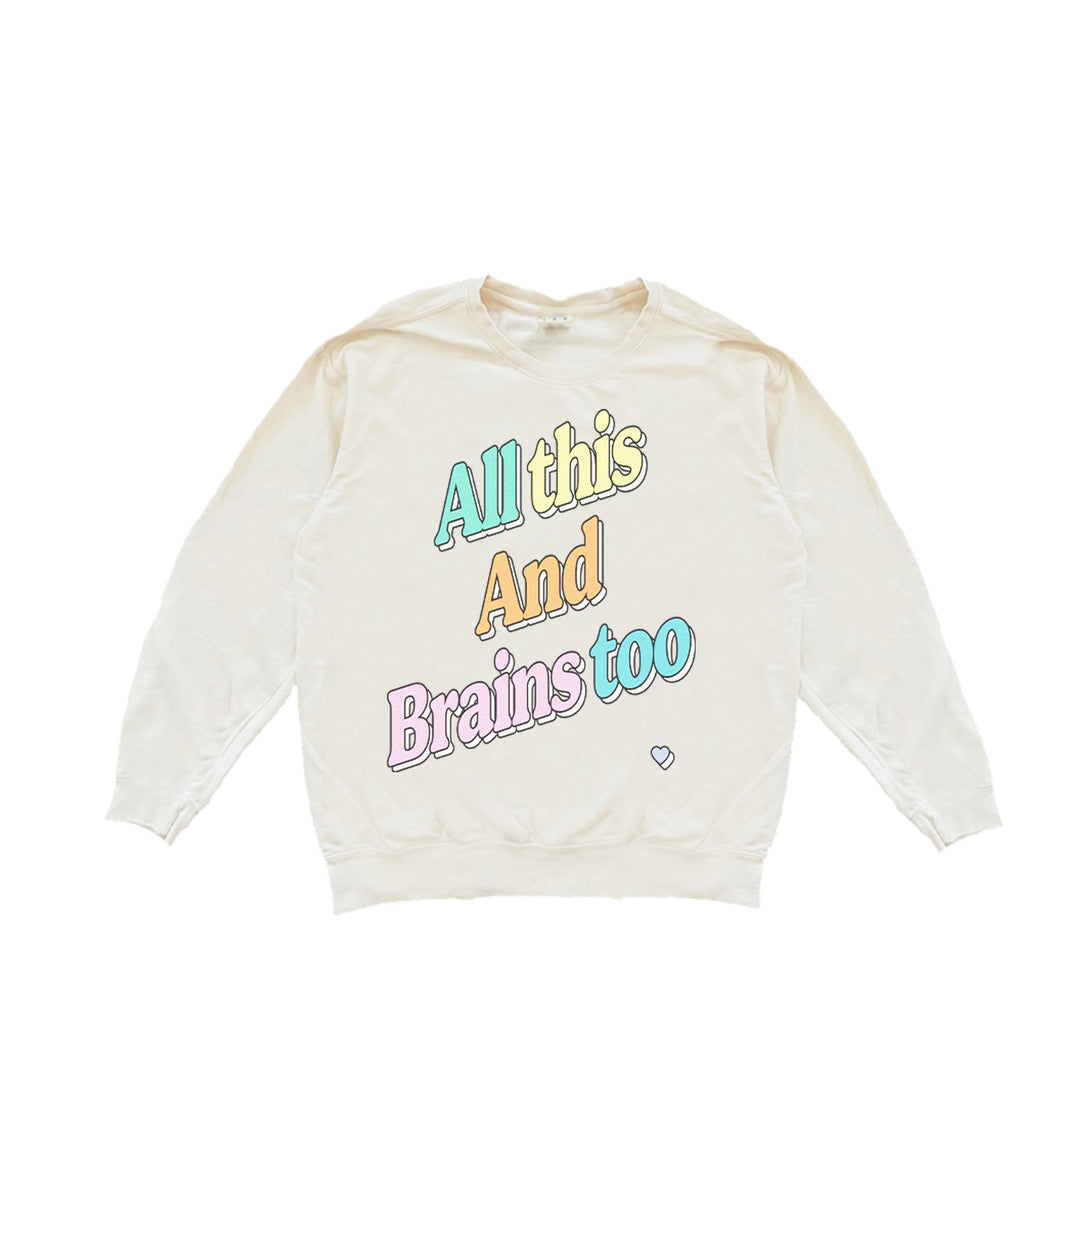 All This And Brains Too Pastel Lightweight Crewneck